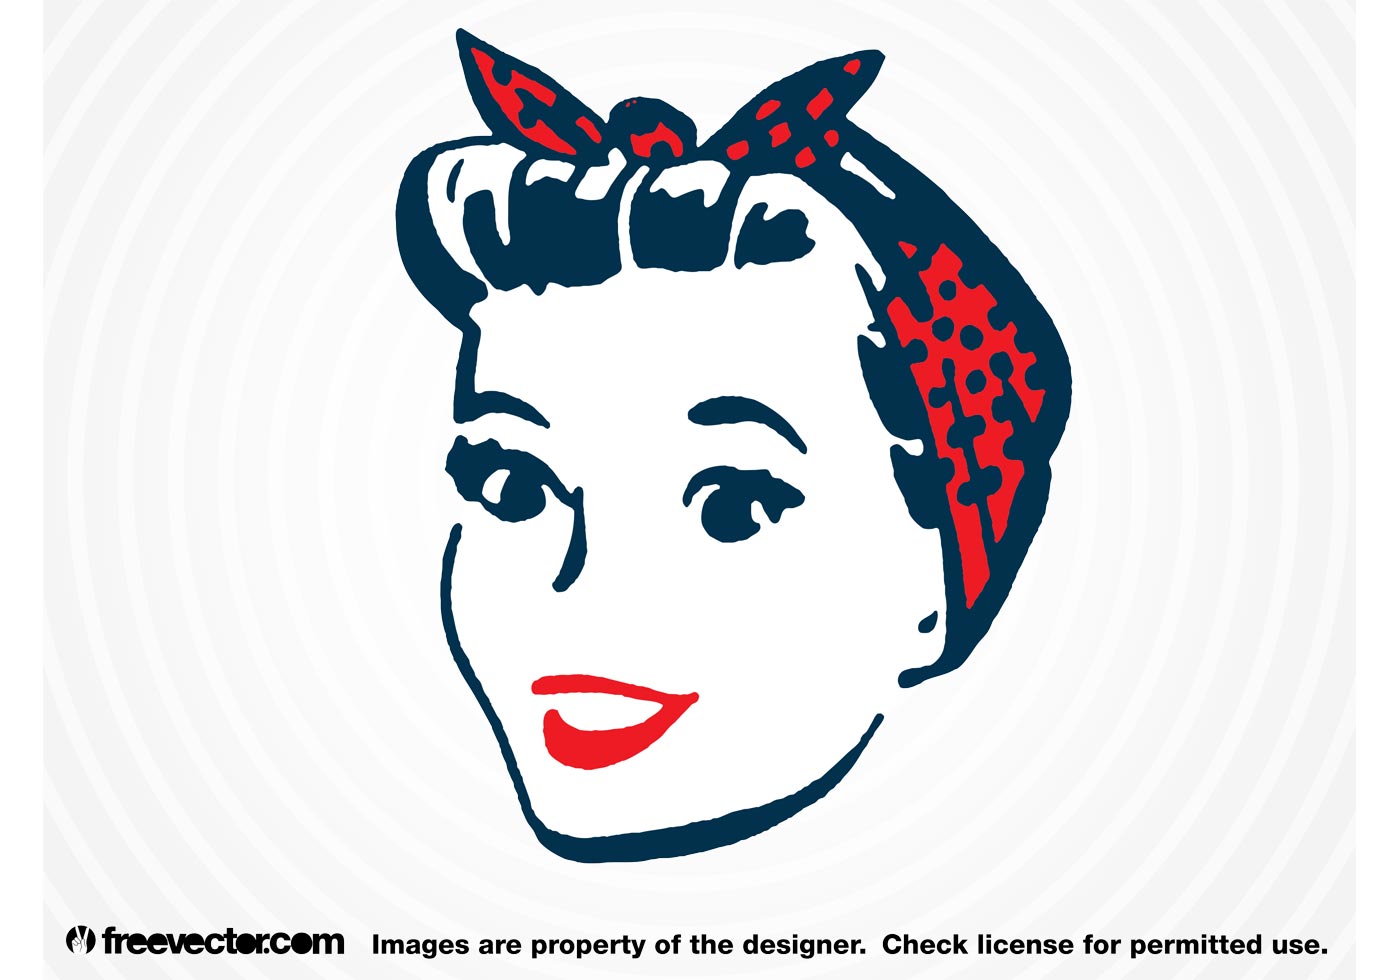 Retro Housewife - Download Free Vector Art, Stock Graphics & Images